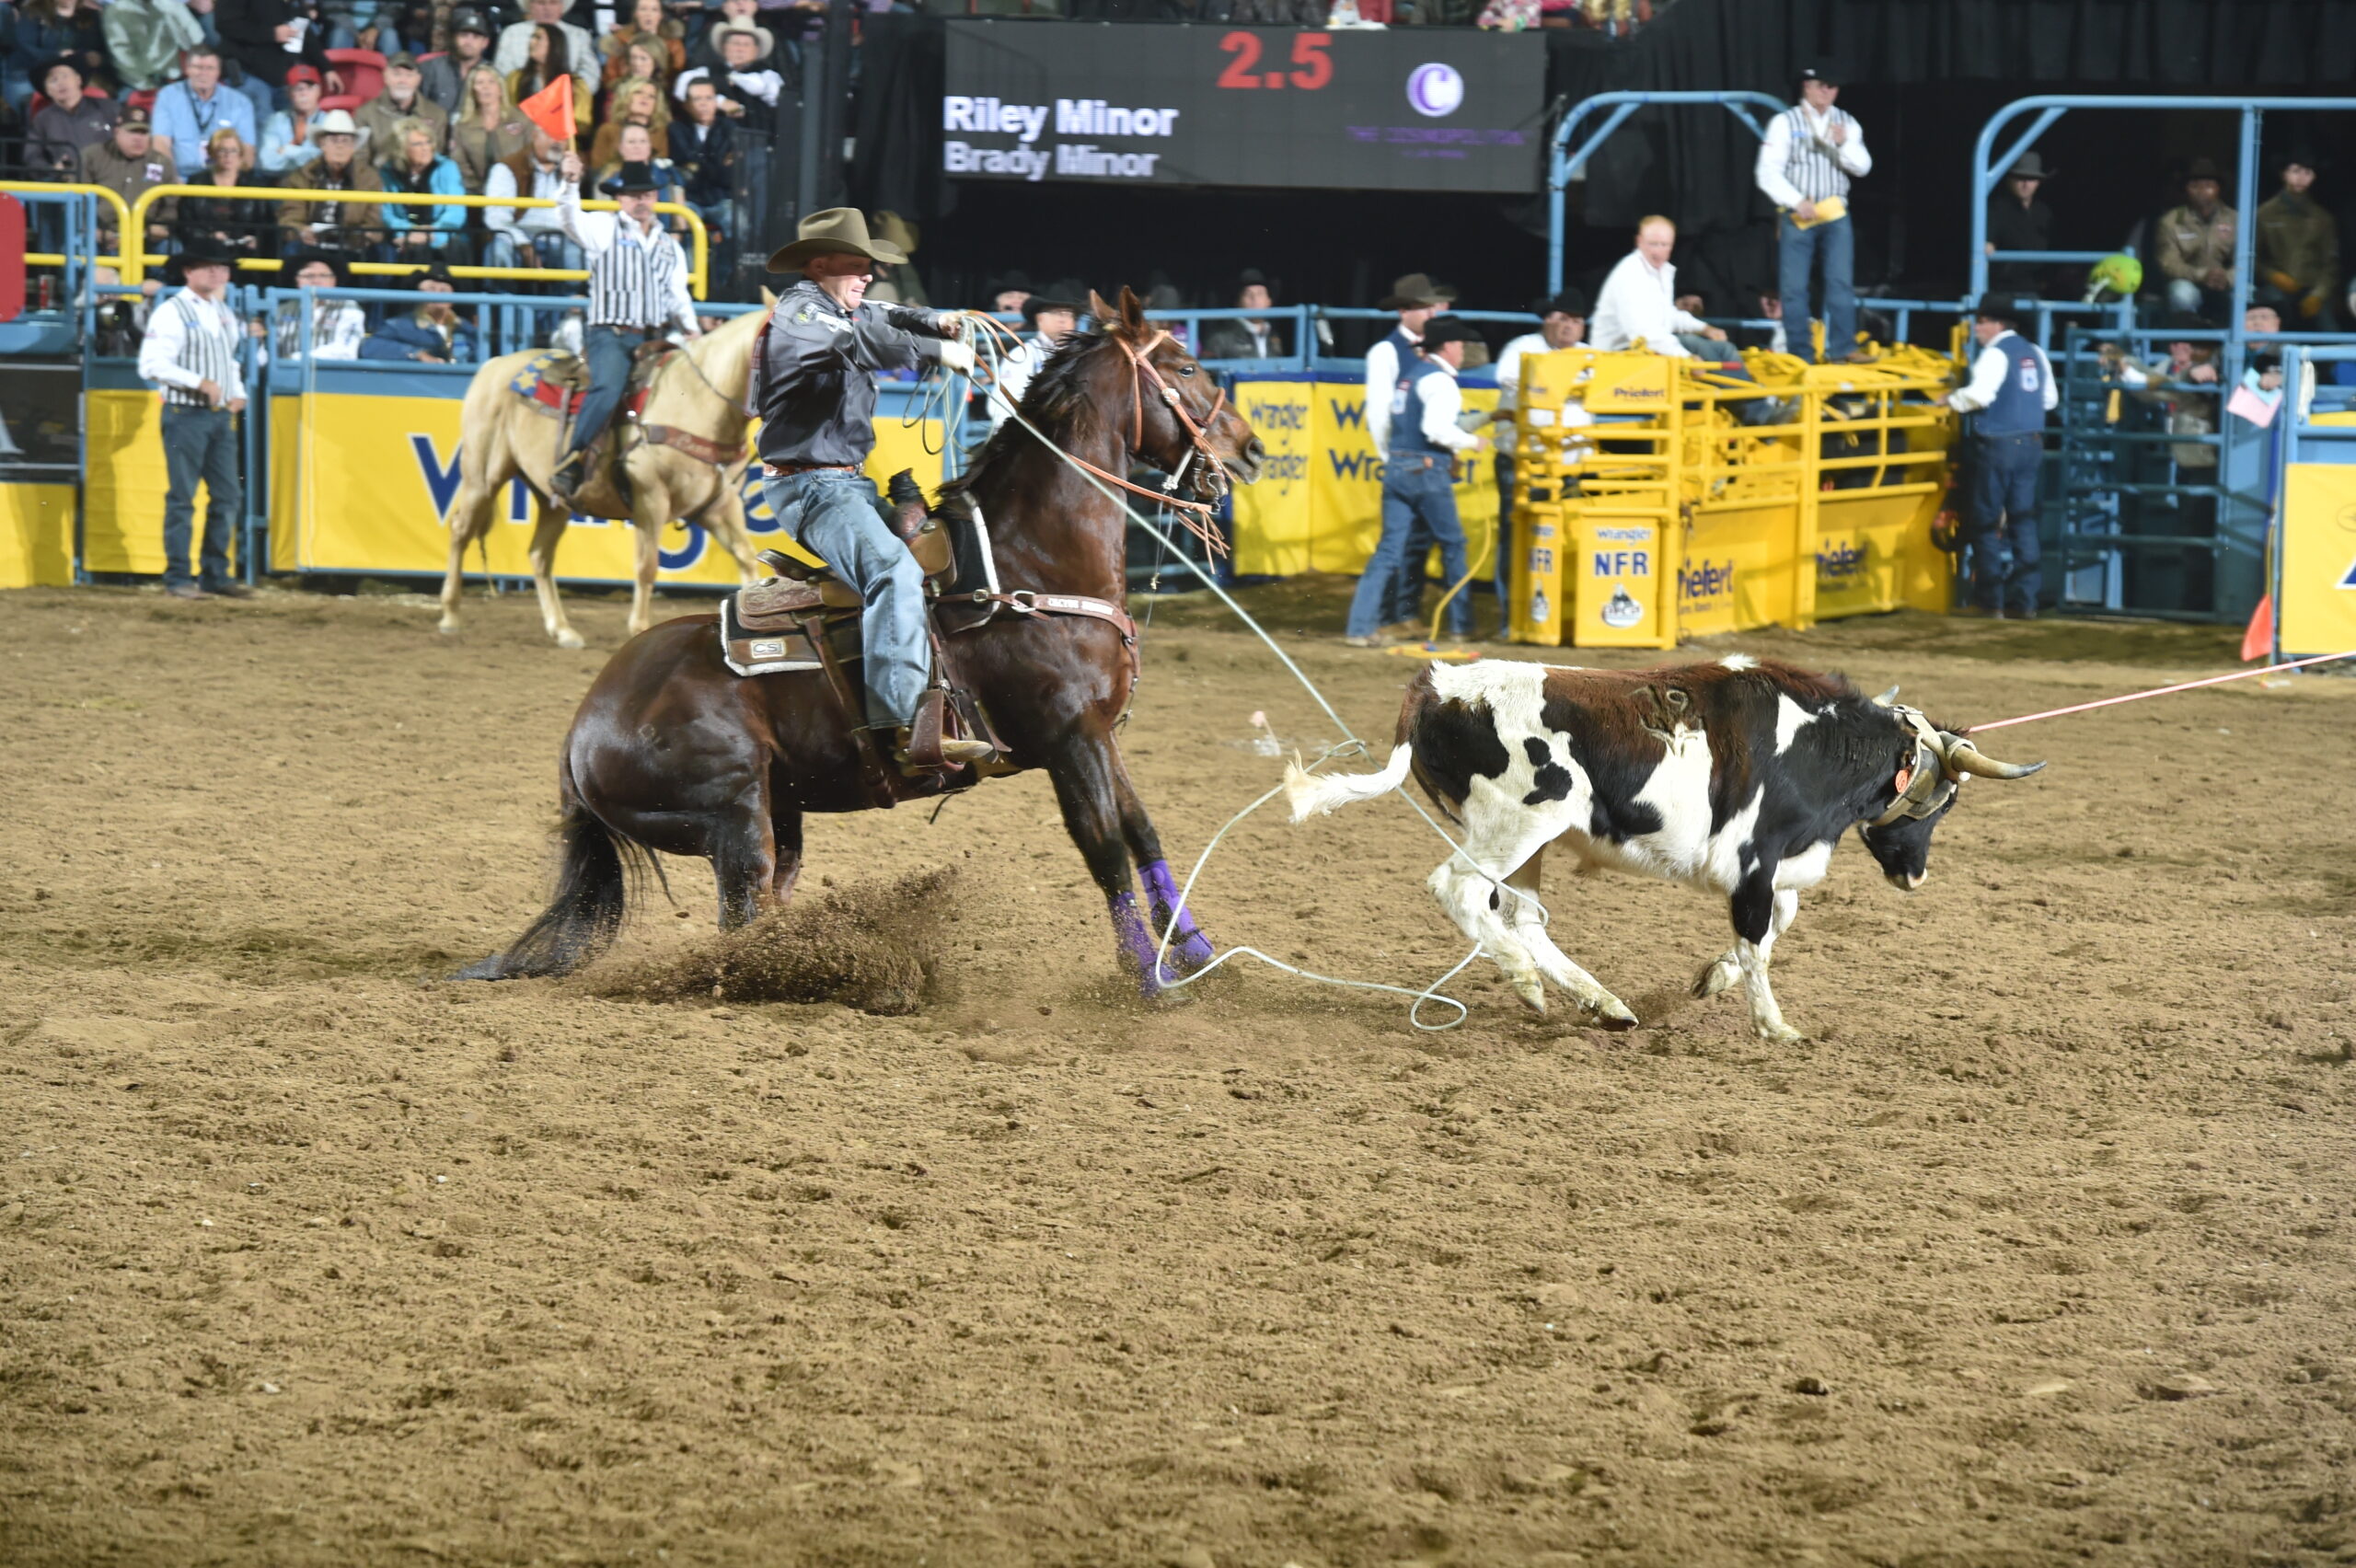 Brady Minor and Rey compete in the Fourth Round of the 2016 NFR.